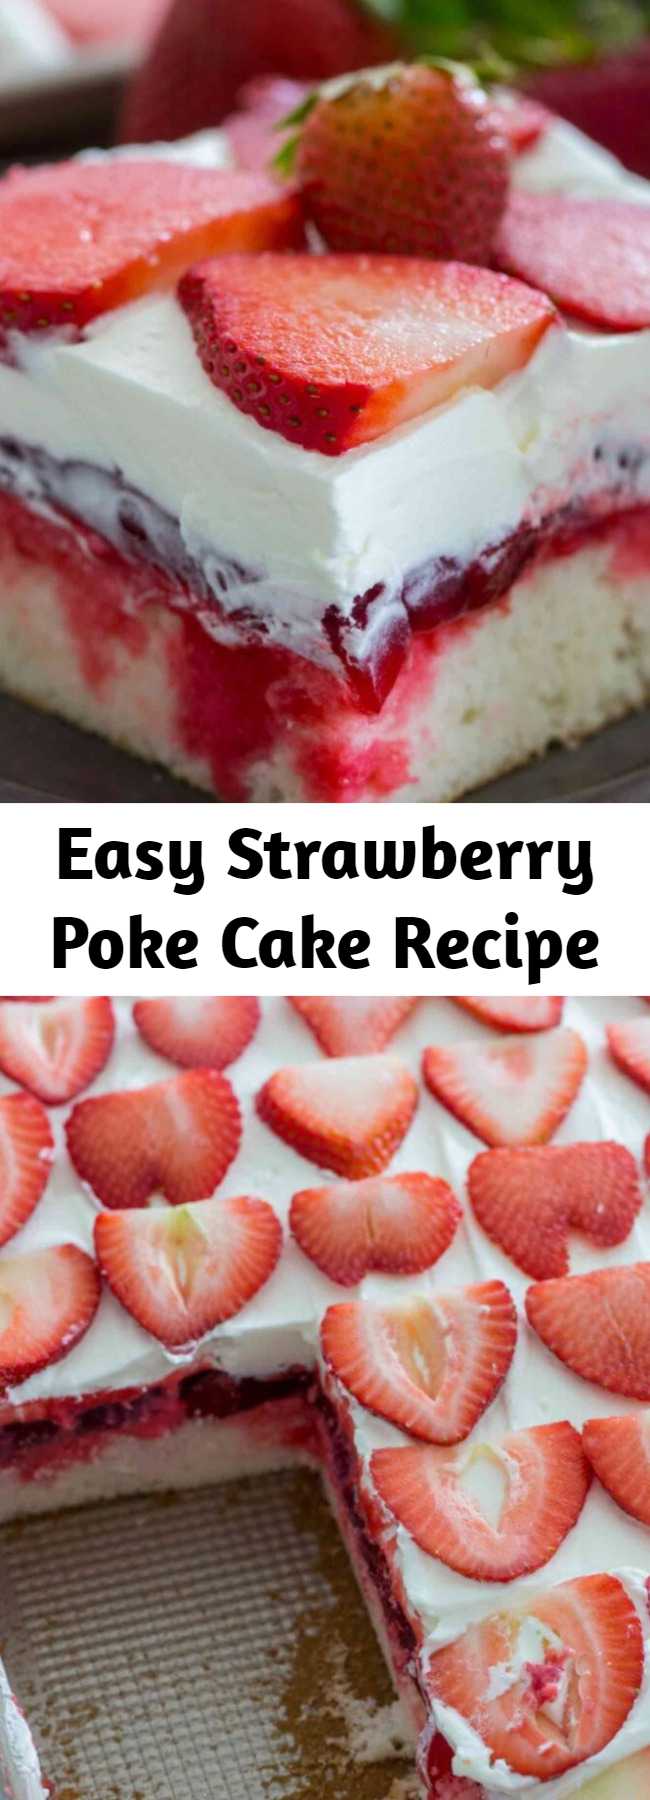 Easy Strawberry Poke Cake Recipe - Strawberry Poke Cake is made with white cake, soaked with a mixture of white chocolate strawberry sauce, topped with strawberry pie filling and creamy whipped cream. #pokecake #strawberry #strawberrycake #dessertrecipes #desserts #cakerecipes #cake